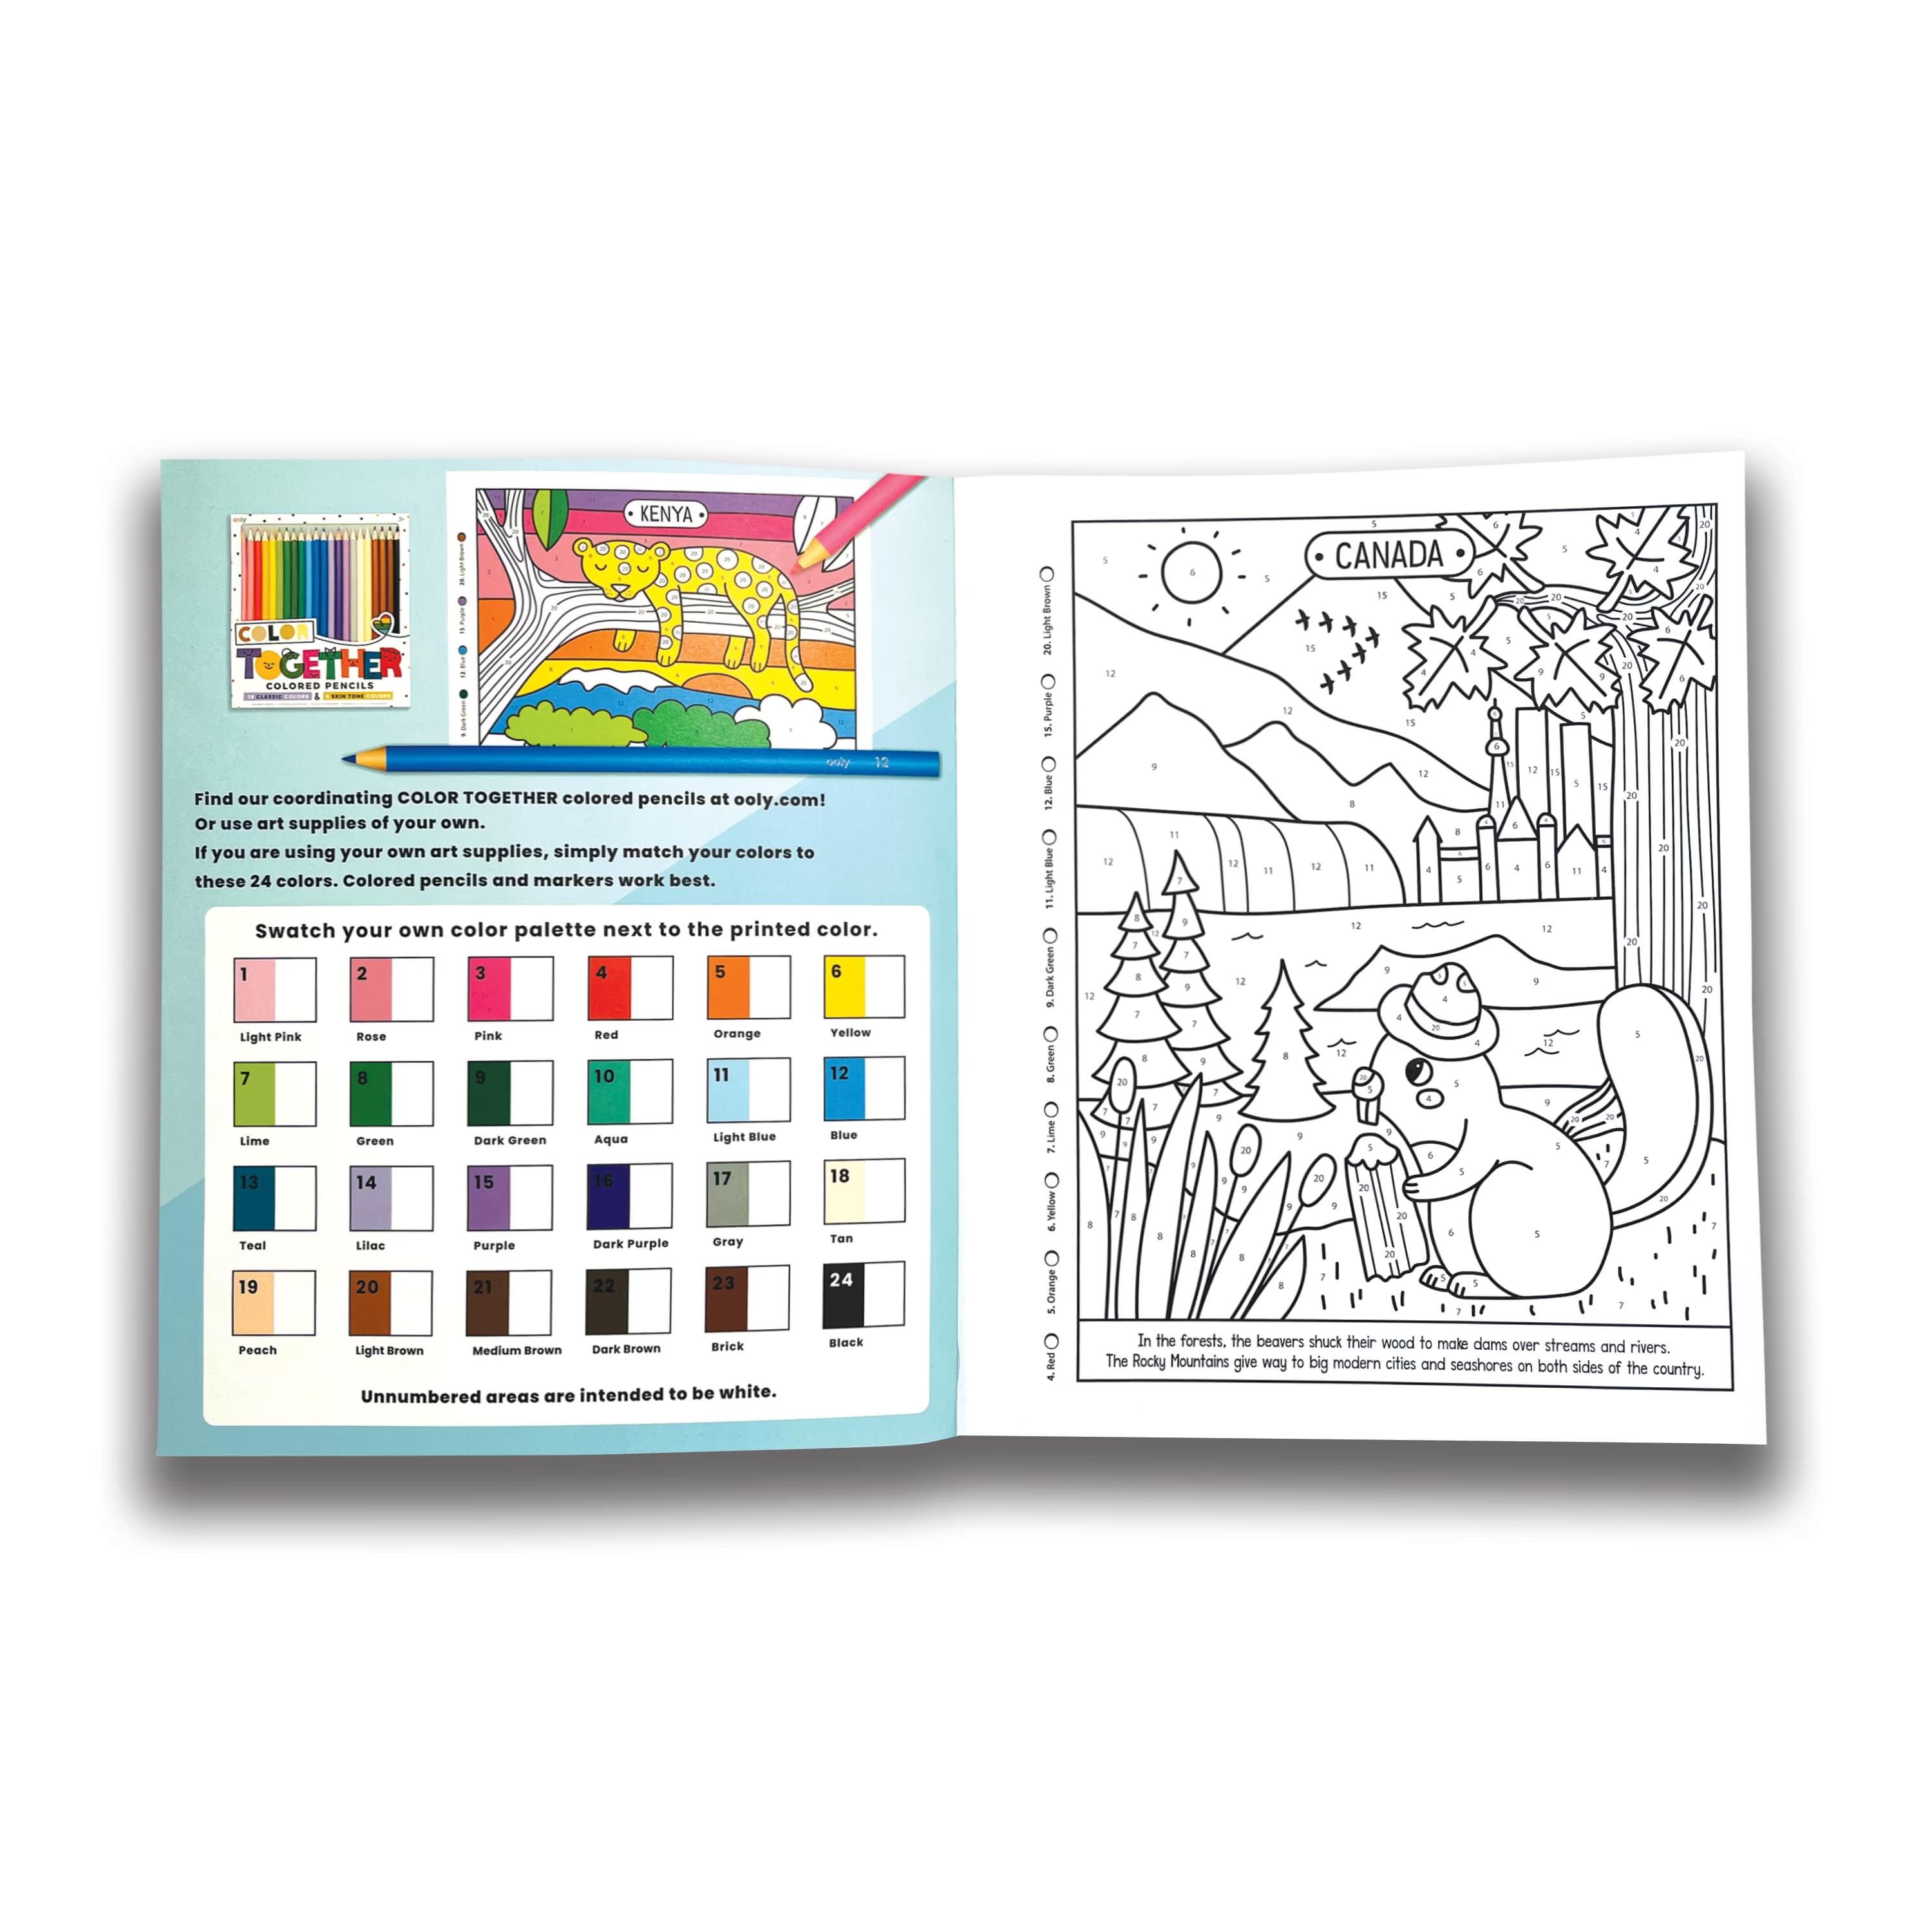 OOLY Color By Numbers Wonderful World Coloring Book